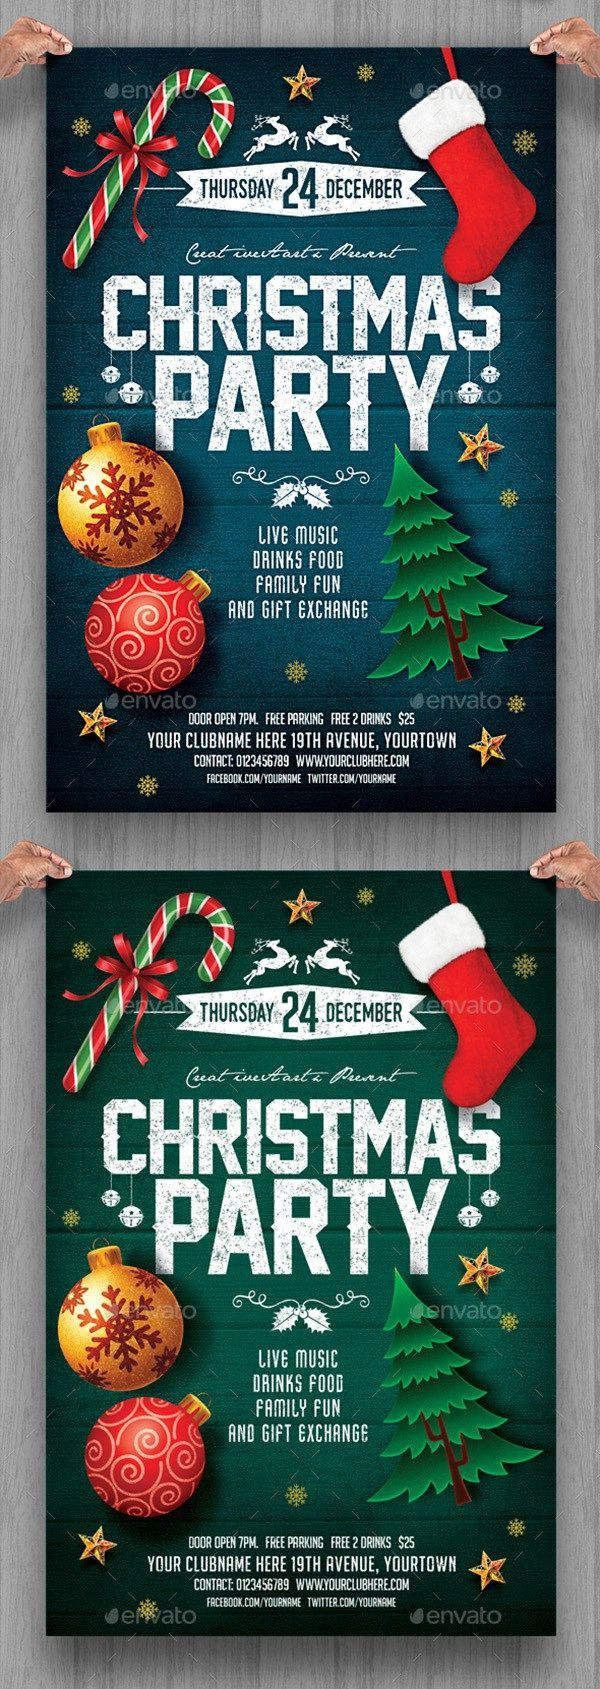 Christmas Party Posters Ideas
 Christmas Party Flyer Invitation